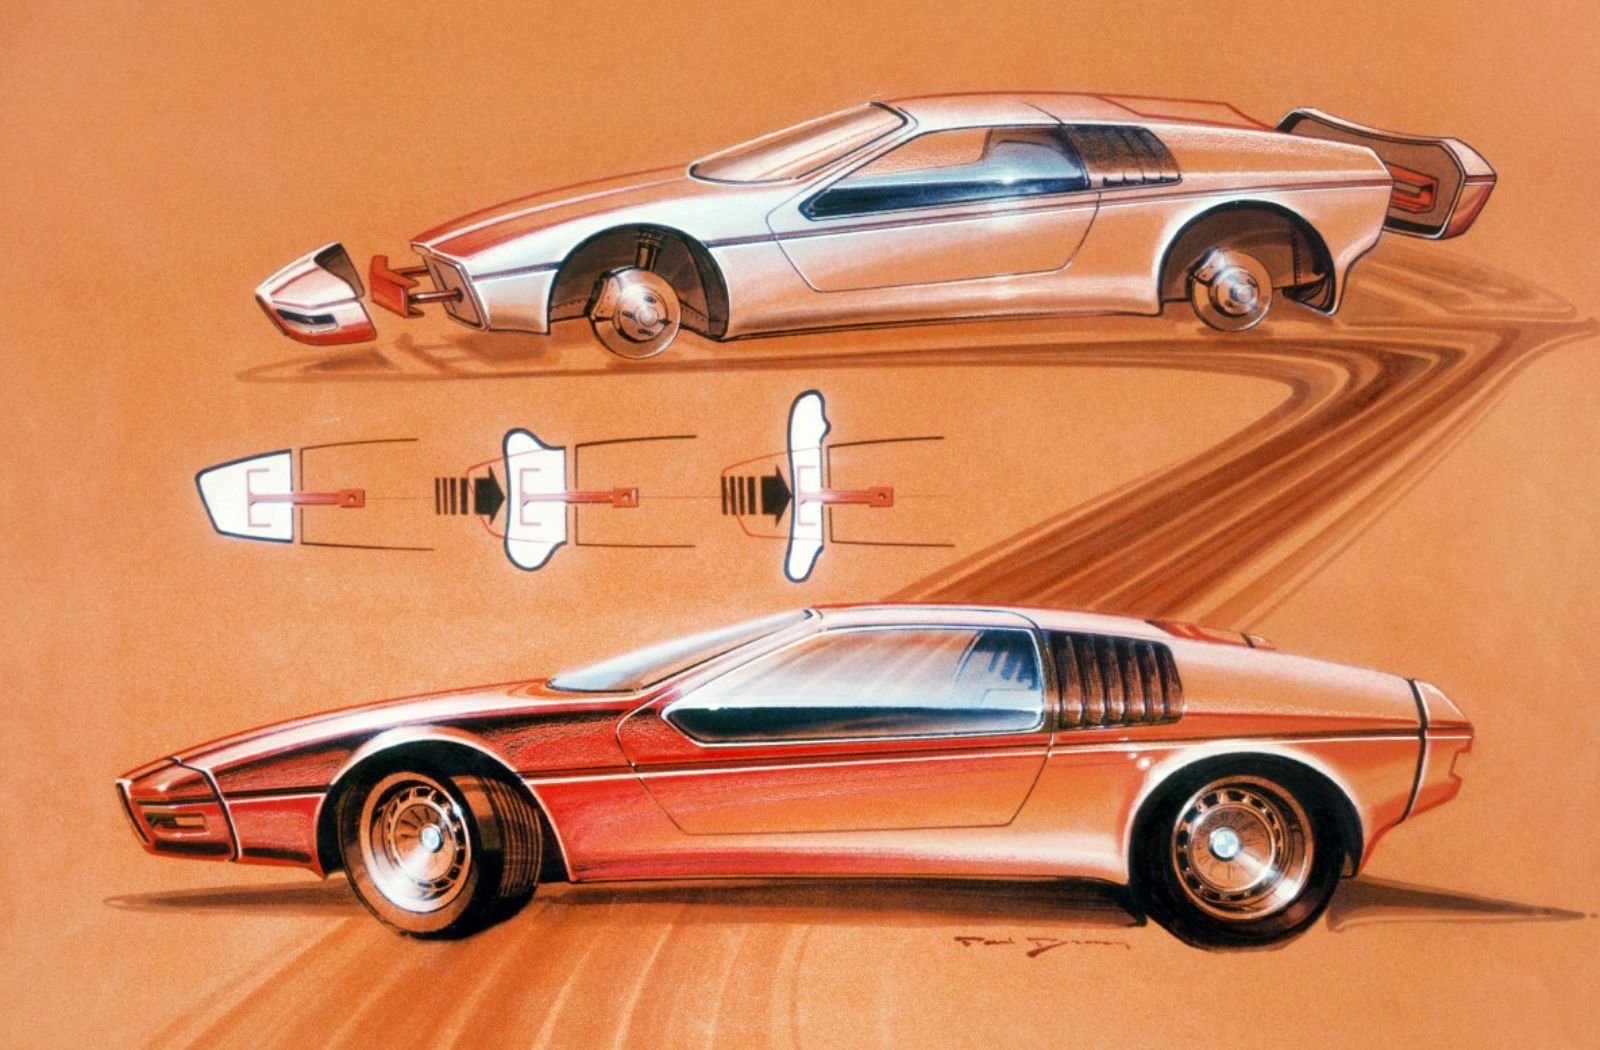 Now 50 Years Old, BMW's Turbo Was a Fascinating Concept That Paved